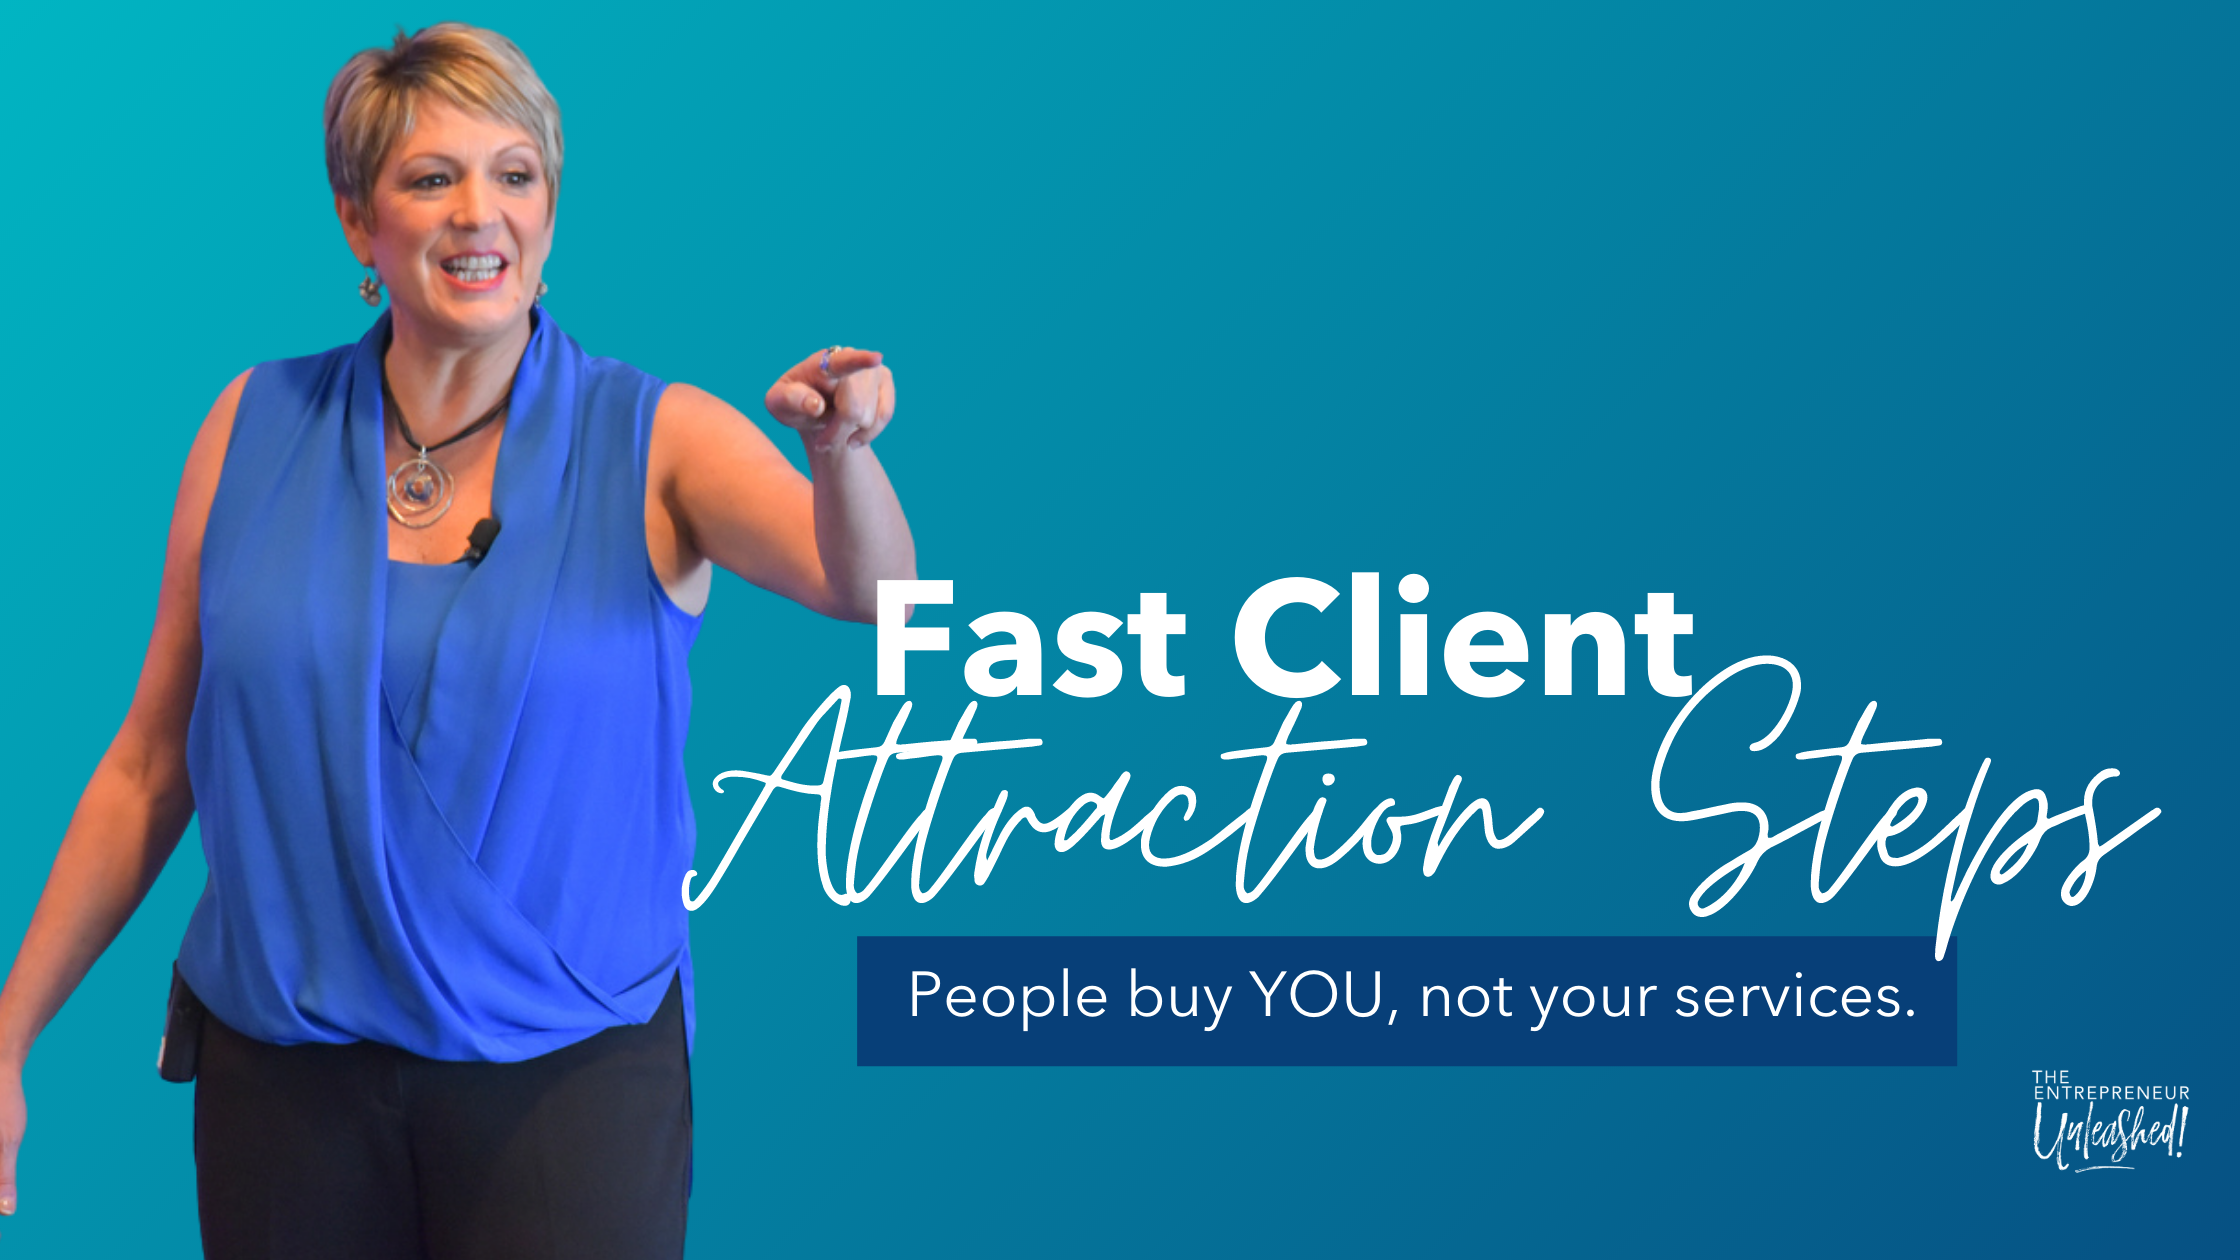 Fast Client Attraction Steps - Patti Keating